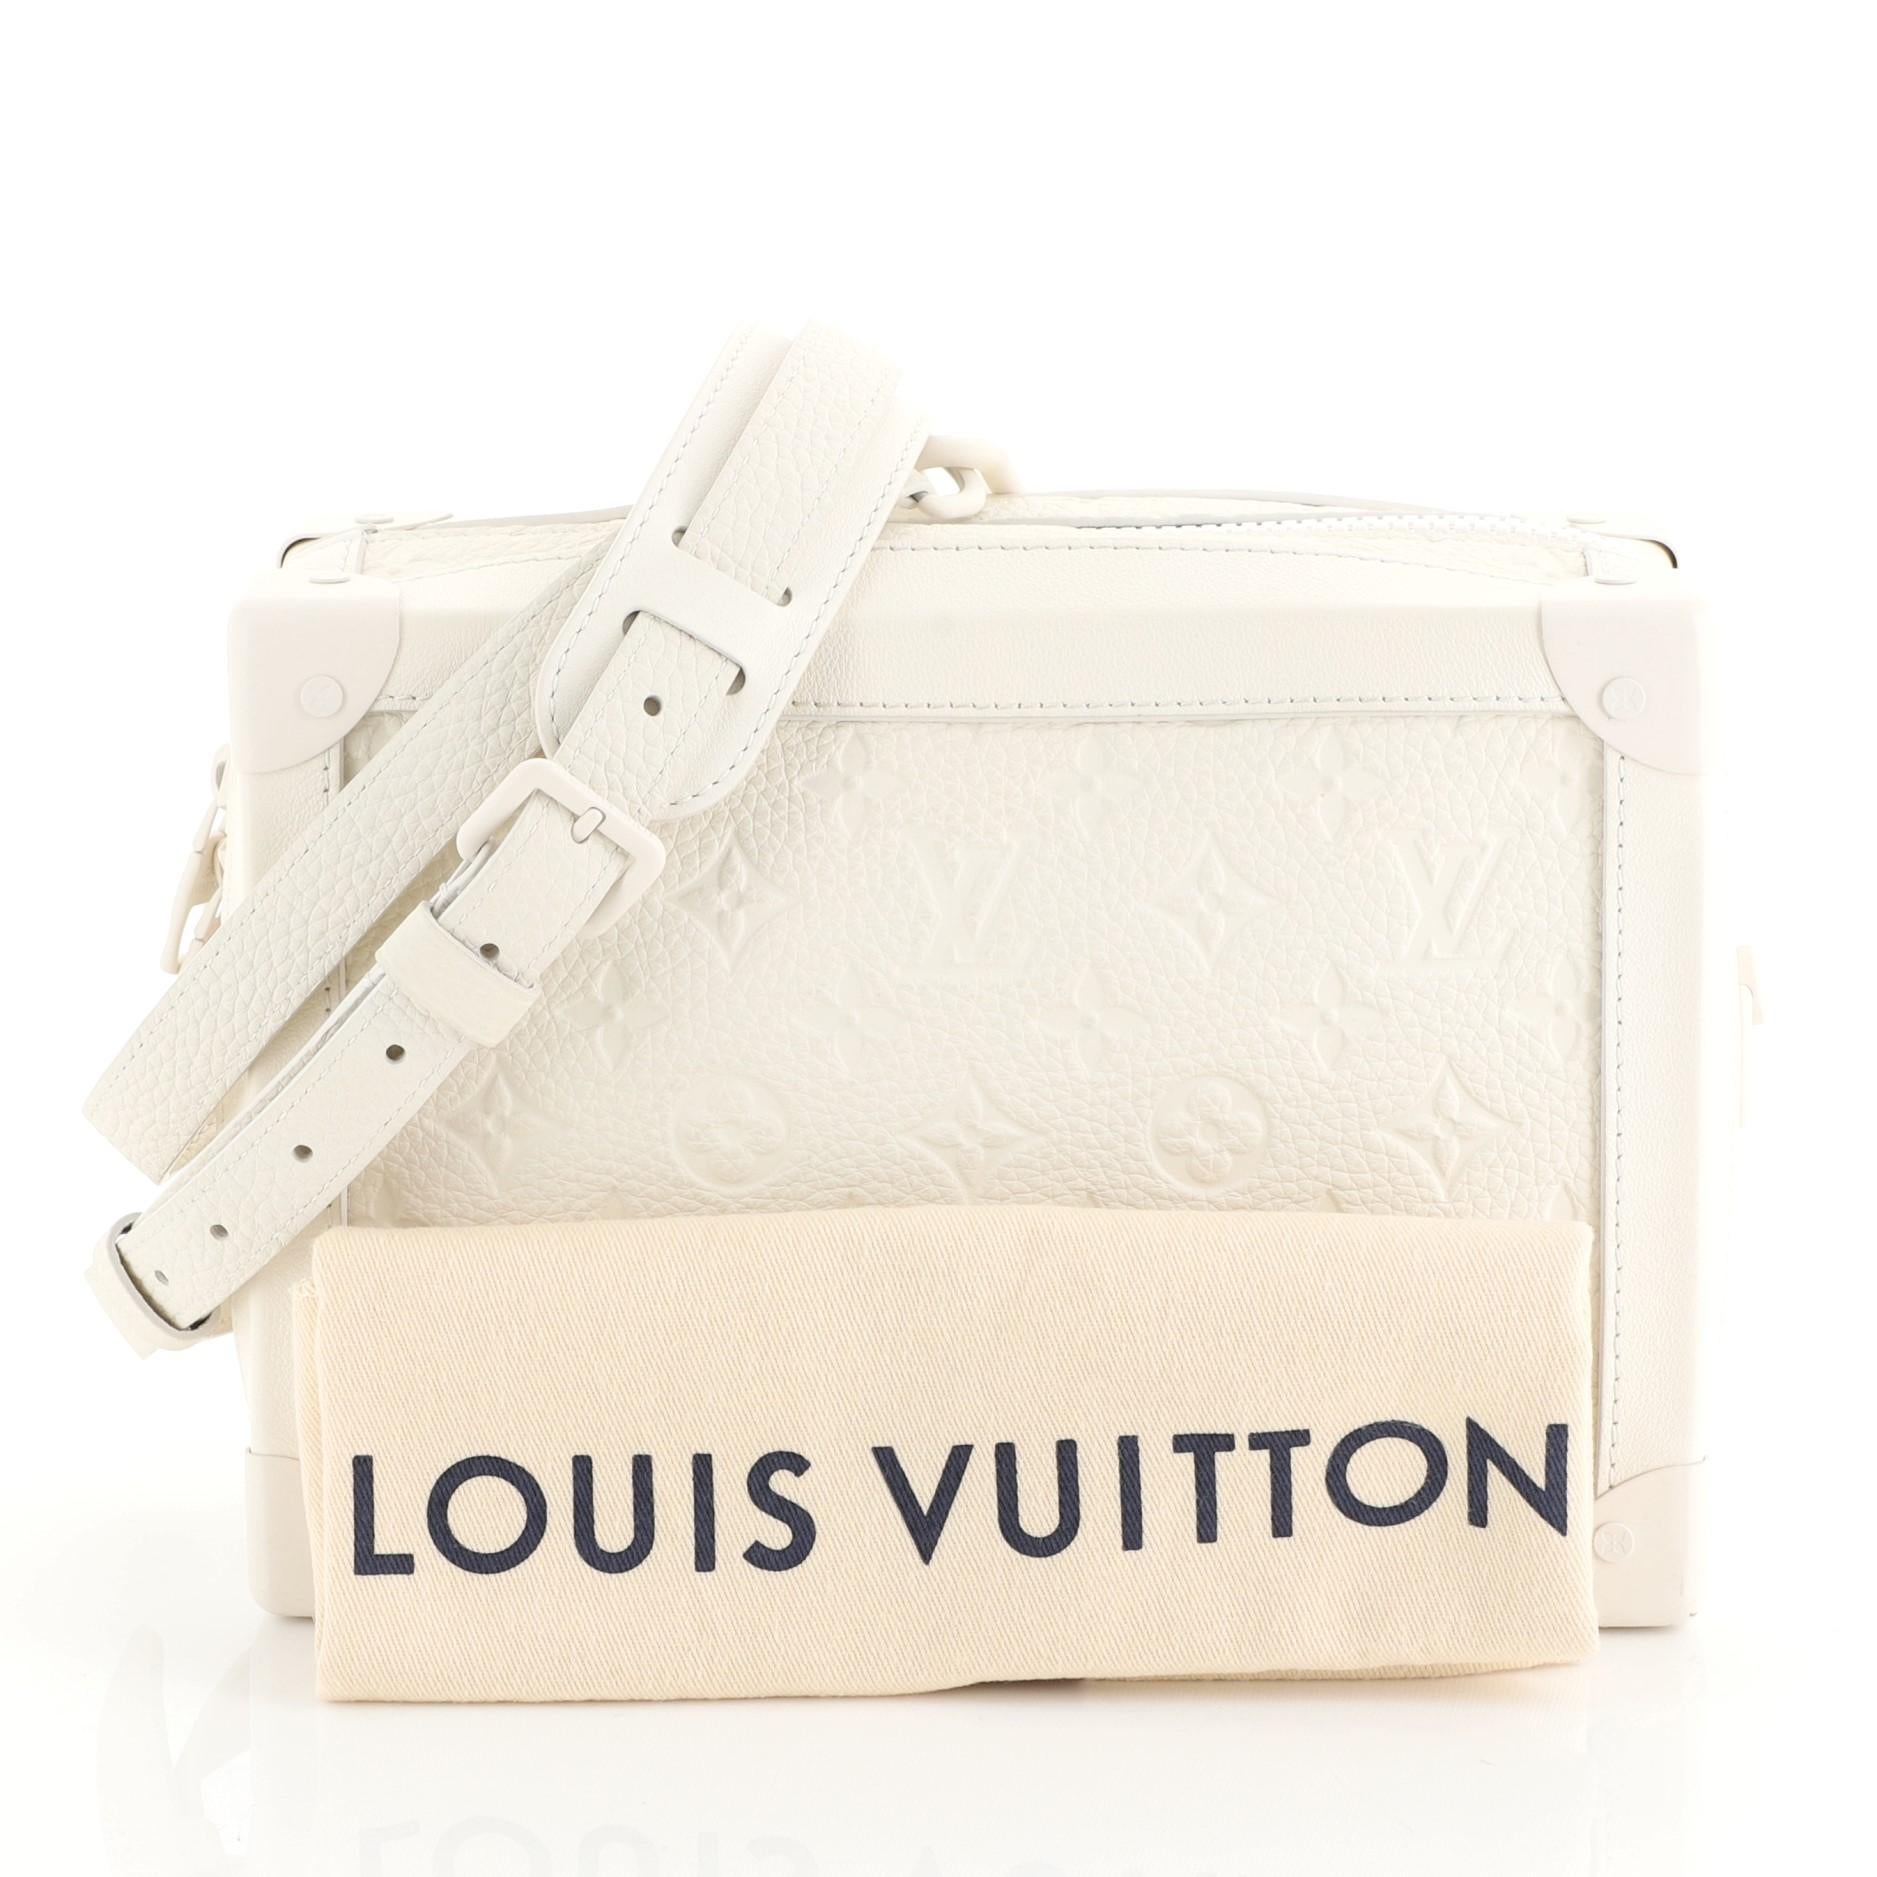 This Louis Vuitton Soft Trunk Bag Monogram Taurillon, crafted from white monogram leather, features an adjustable leather strap and silver-tone hardware. Its zip closure opens to a black fabric interior with slip pockets. Authenticity code reads: